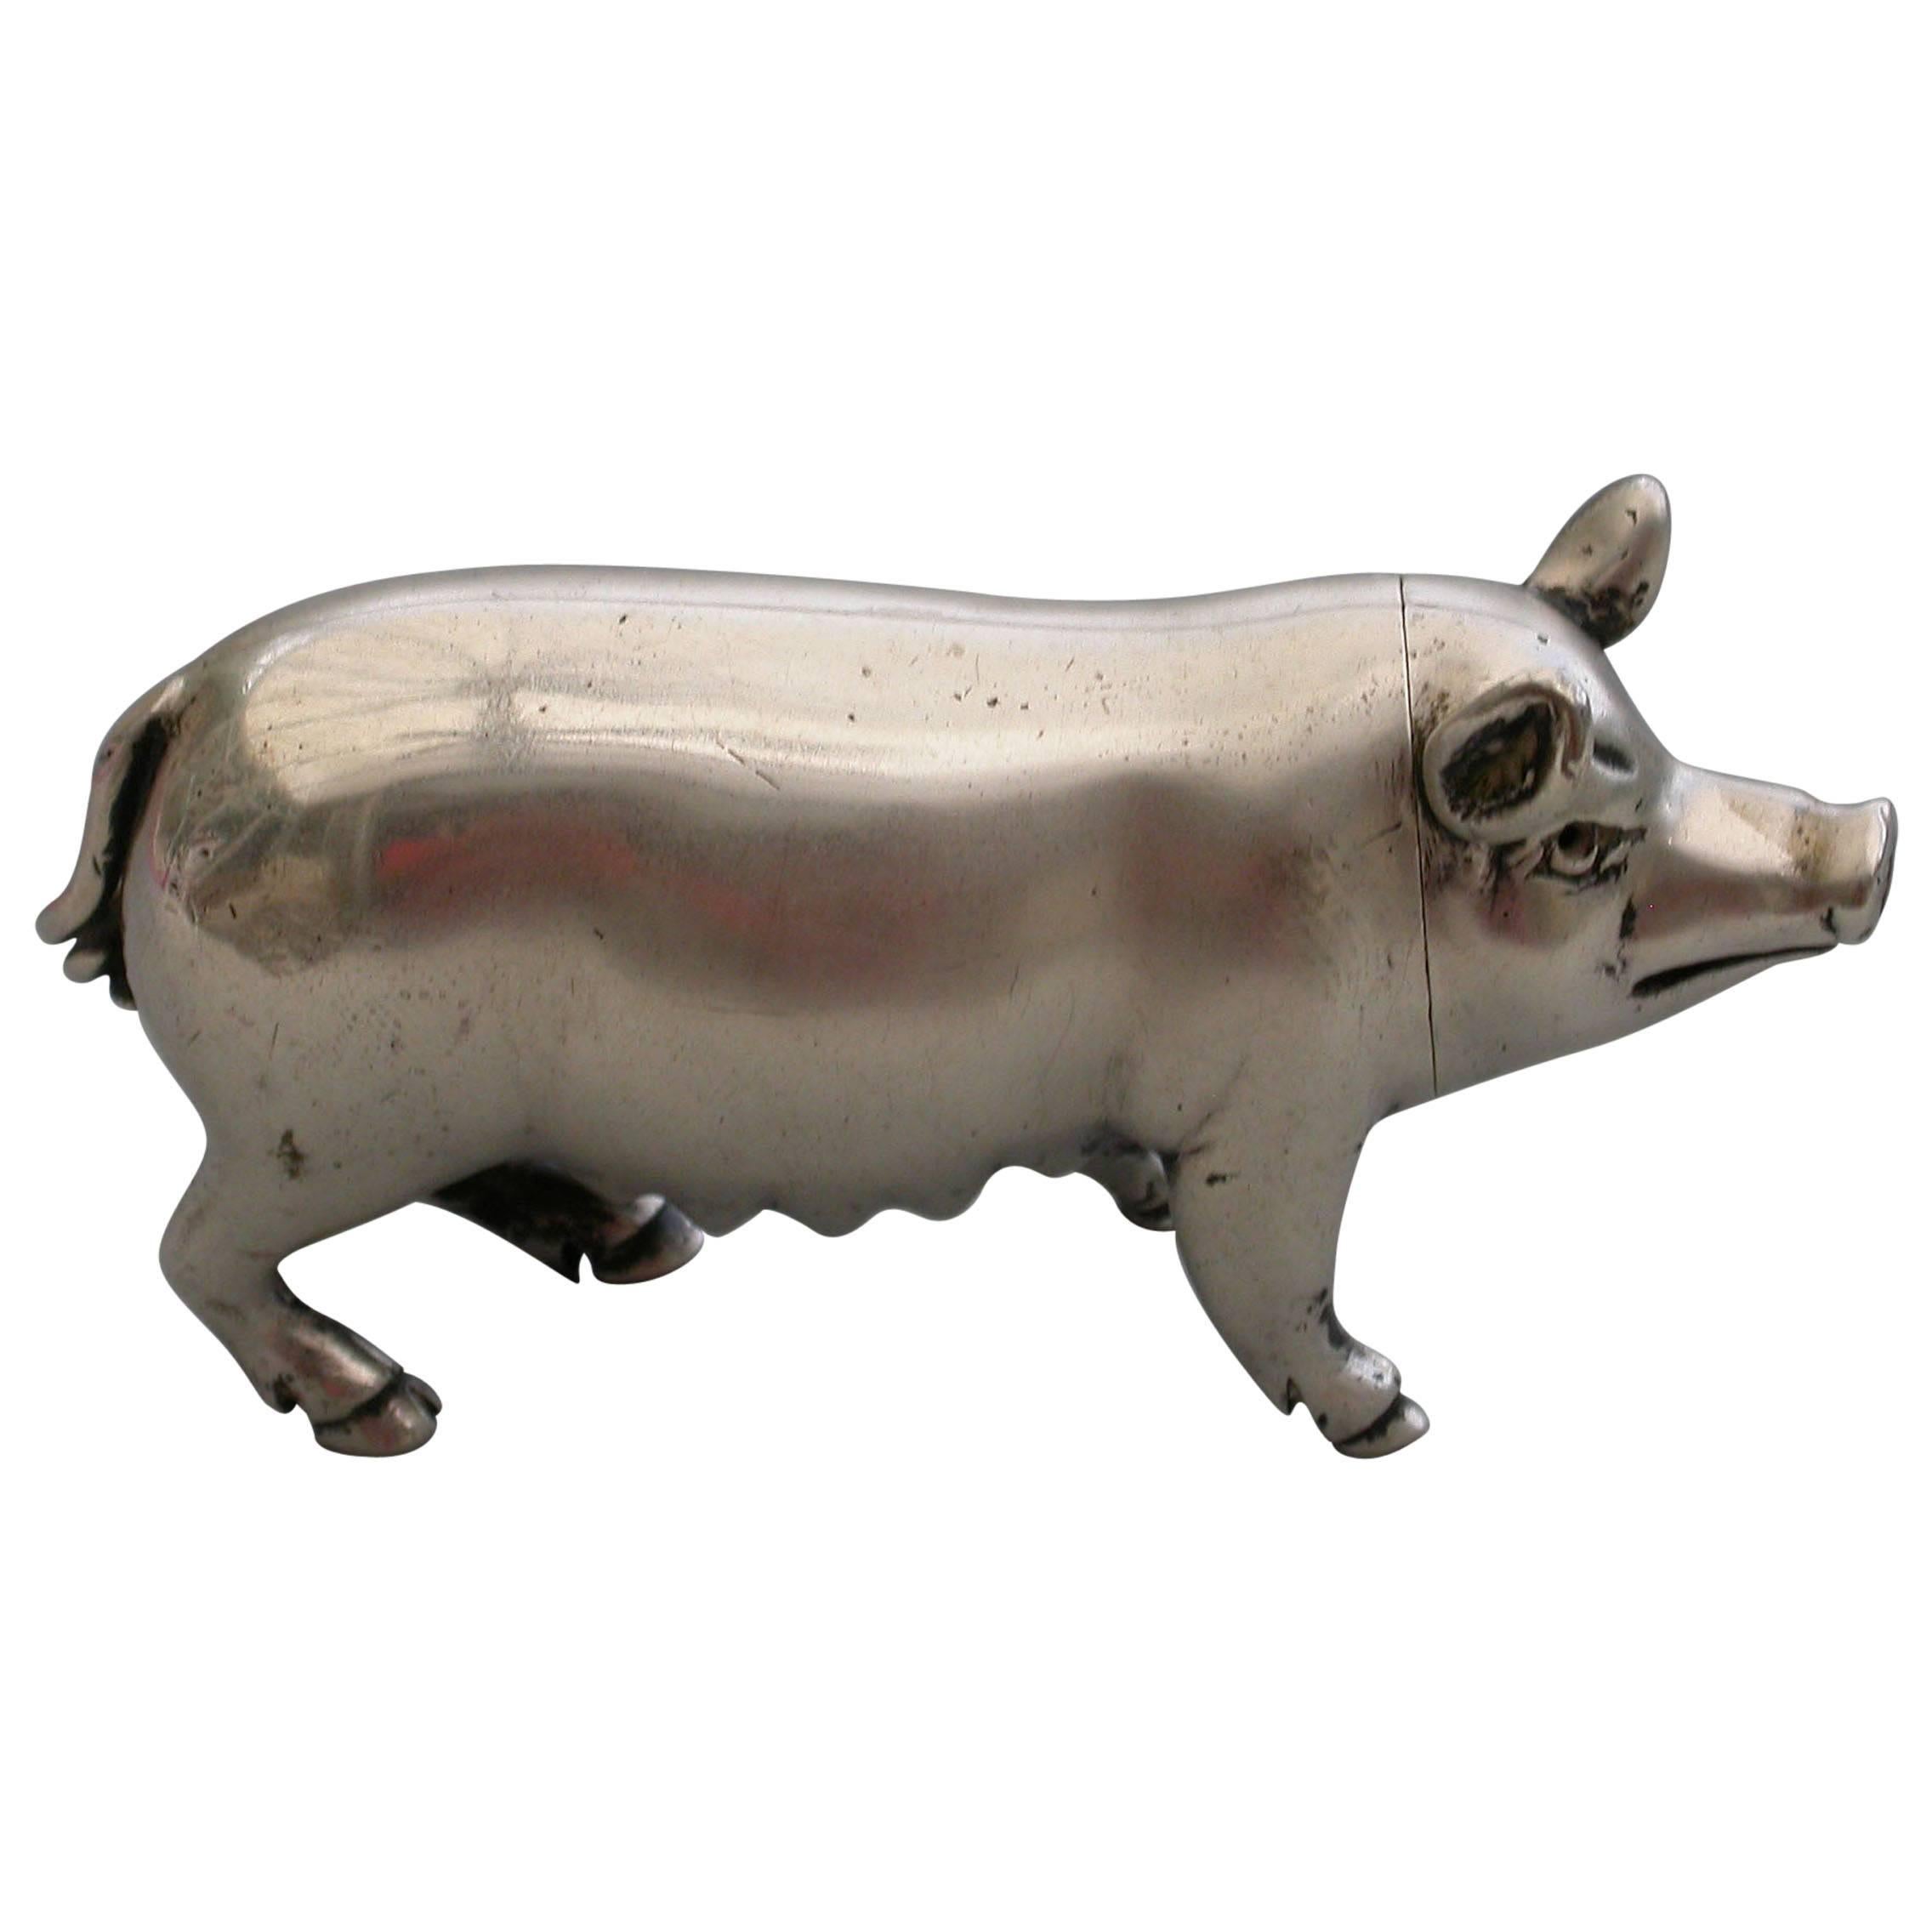 A fine quality Victorian novelty cast silver Pepper made in the form of a Pig, with pull- off pierced head and silver gilt interior. 

By Jane Brownett, London, 1890.

In good condition with no damage or repair

Measures: Height 39 mm (1.54